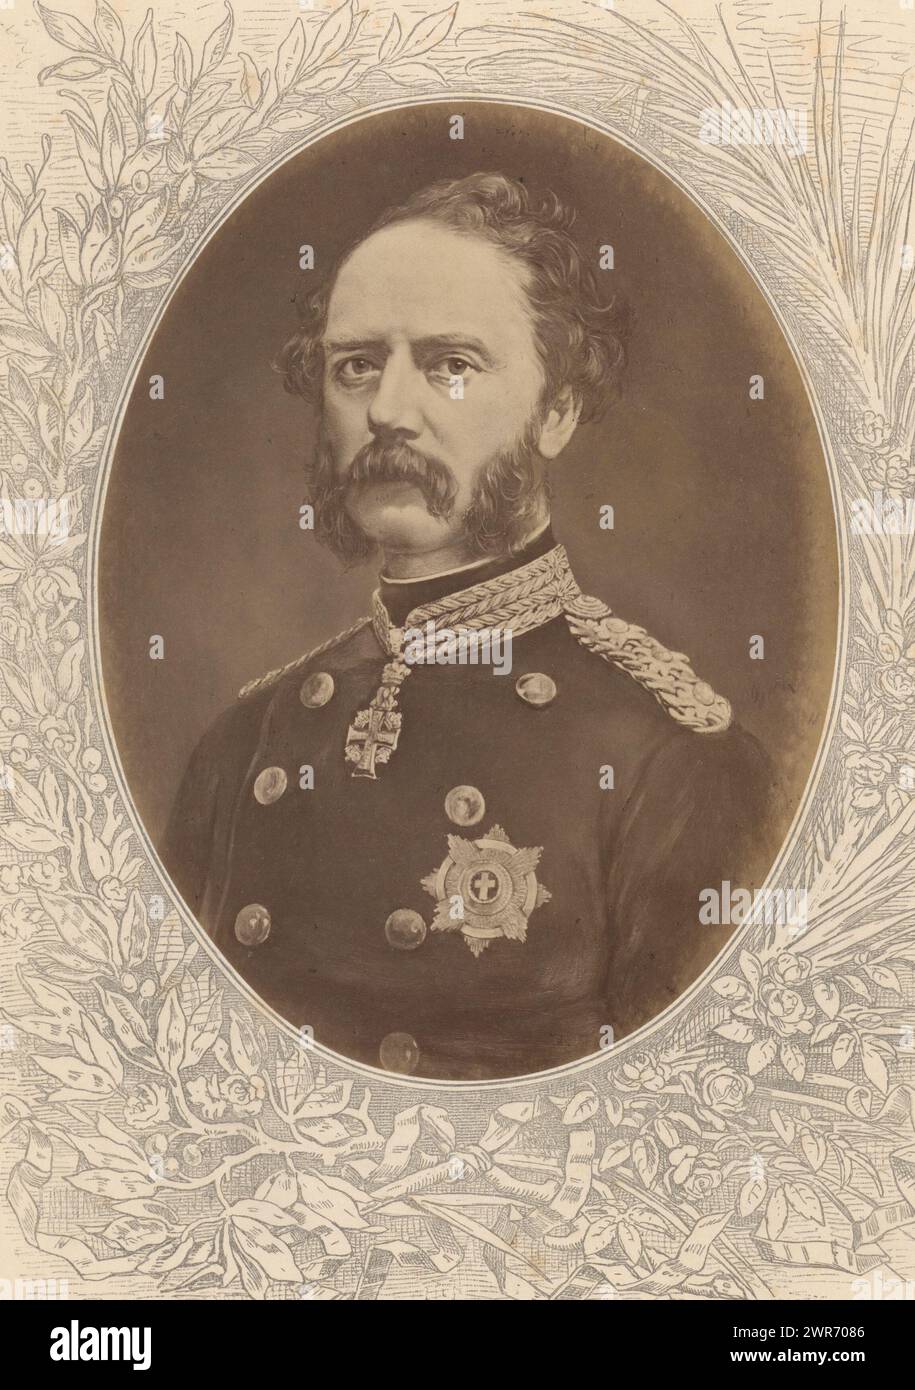 Photo reproduction of a painted portrait of Christian IX, King of Denmark, Christian IX, König von Dänemark (title on object), anonymous, after painting by: anonymous, c. 1875 - in or before 1880, paper, albumen print, height 189 mm × width 143 mm, photograph Stock Photo